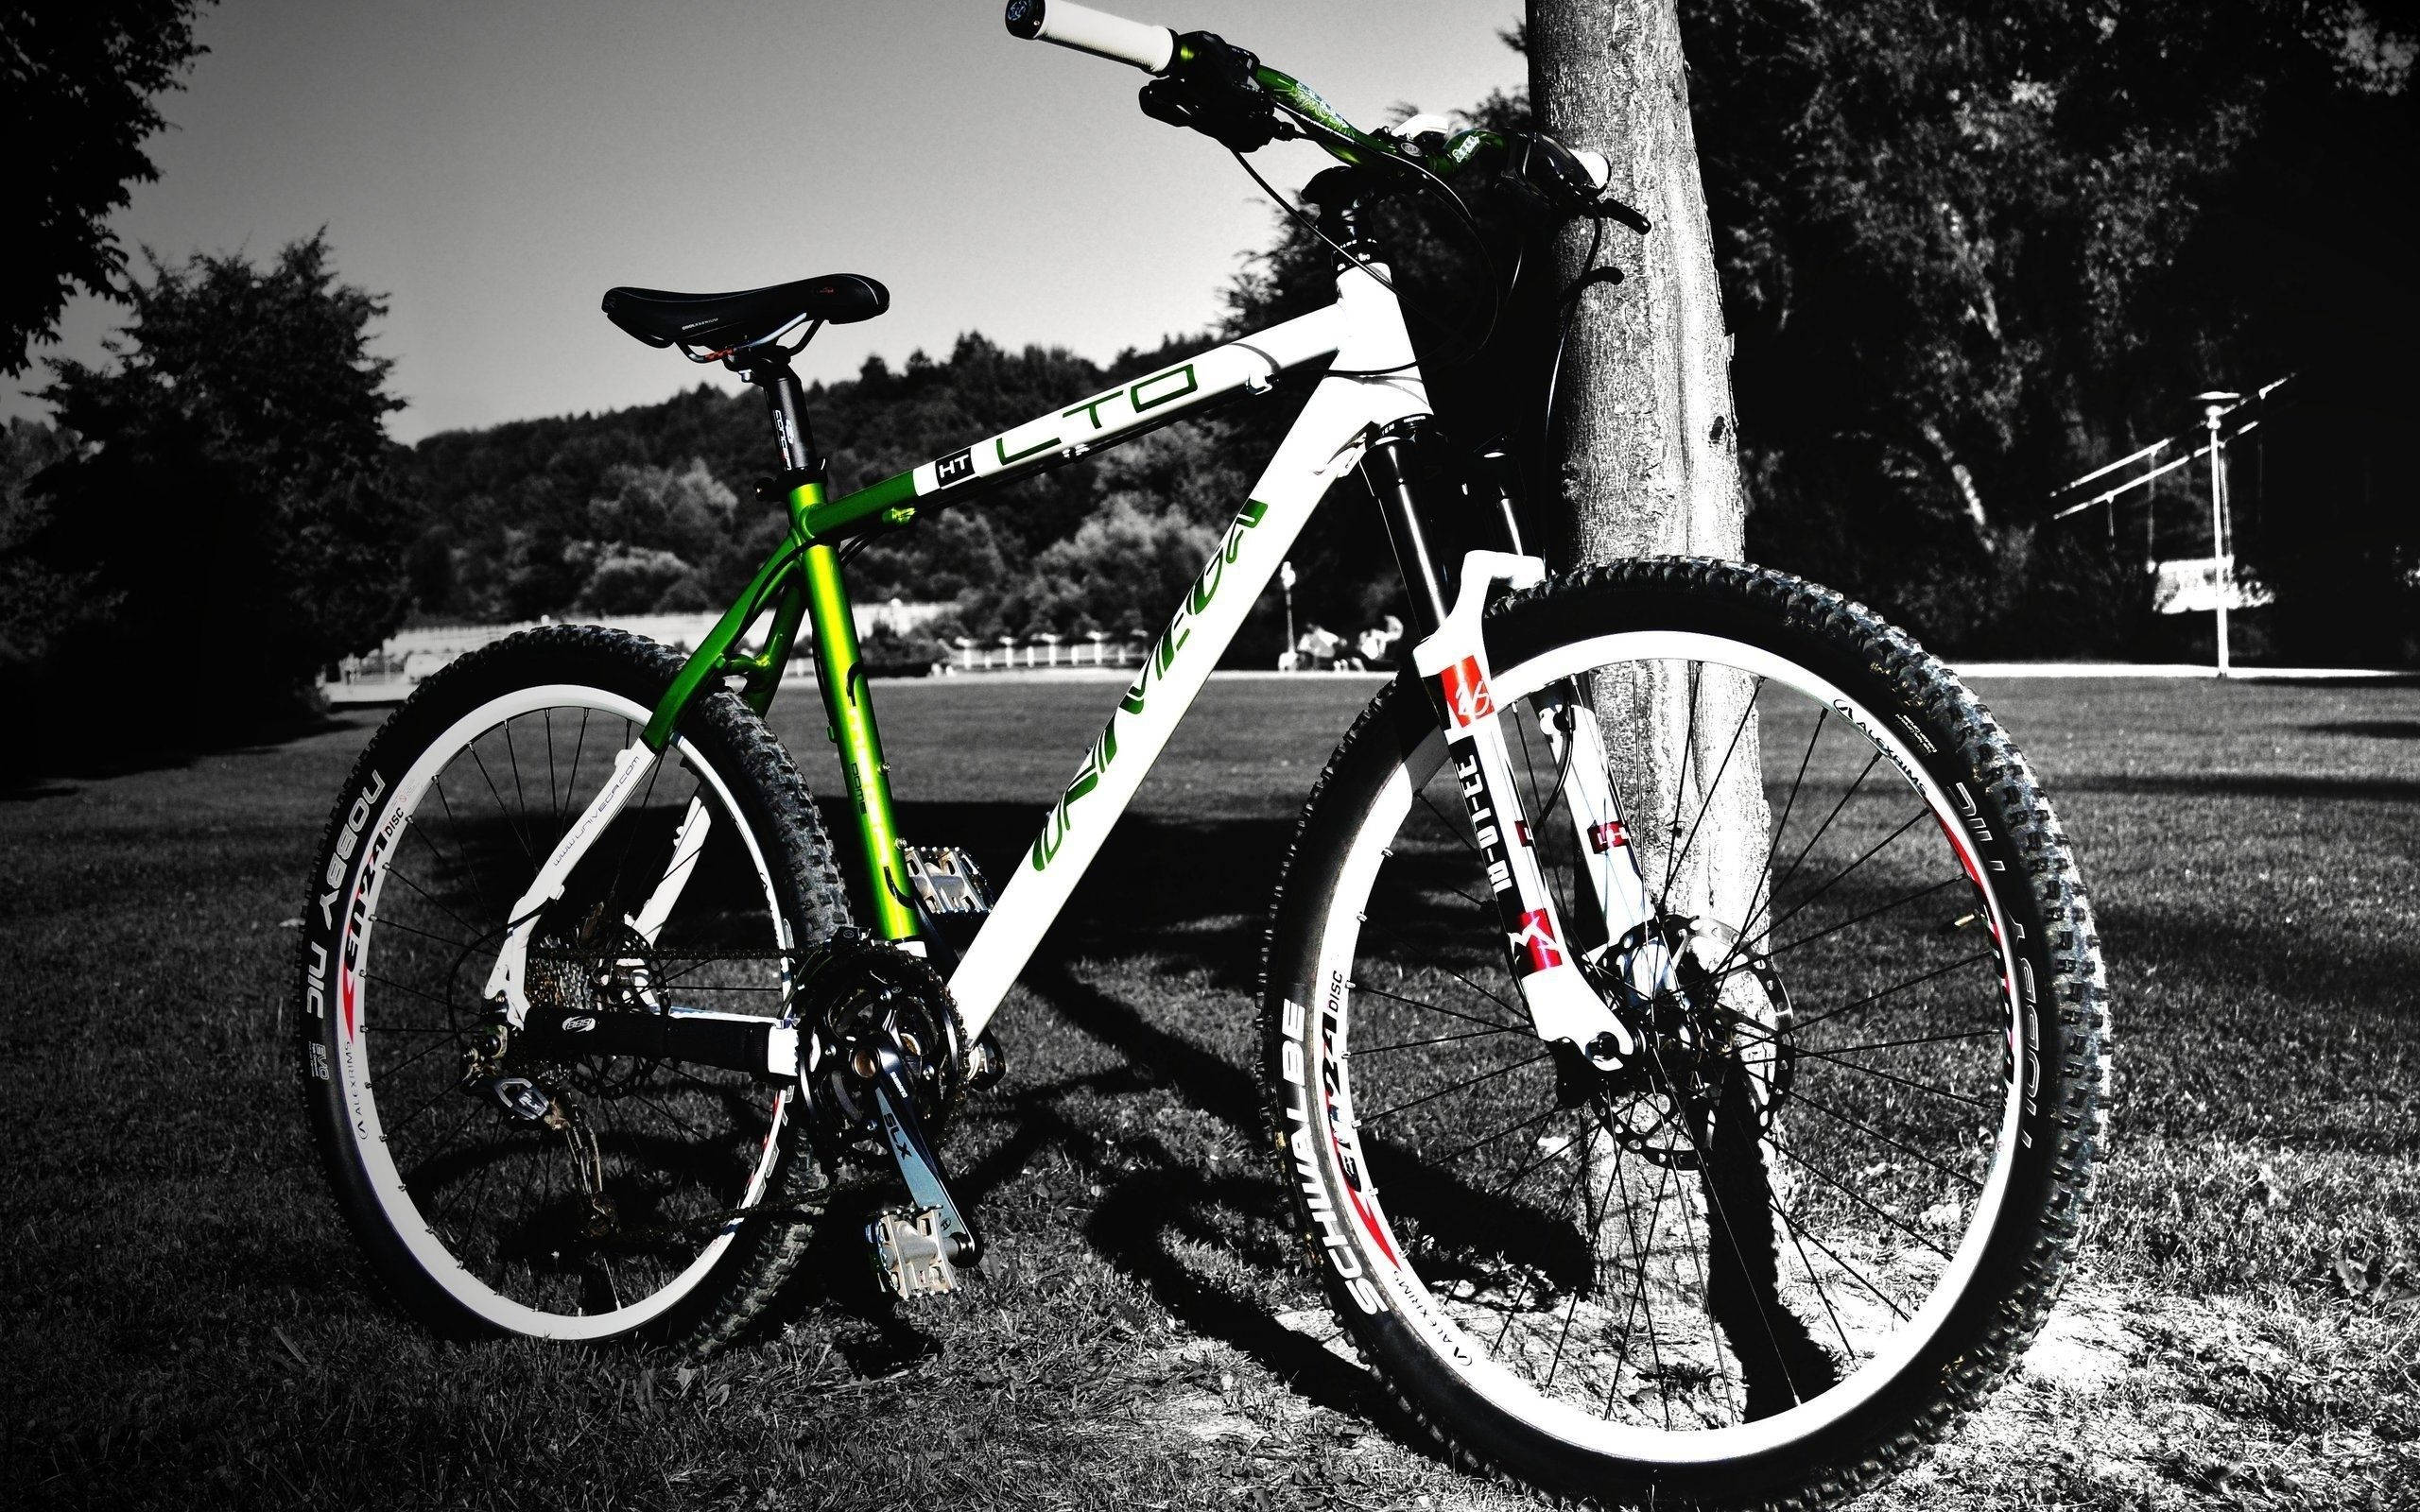 Grayscale Mtb In Tree Park Background